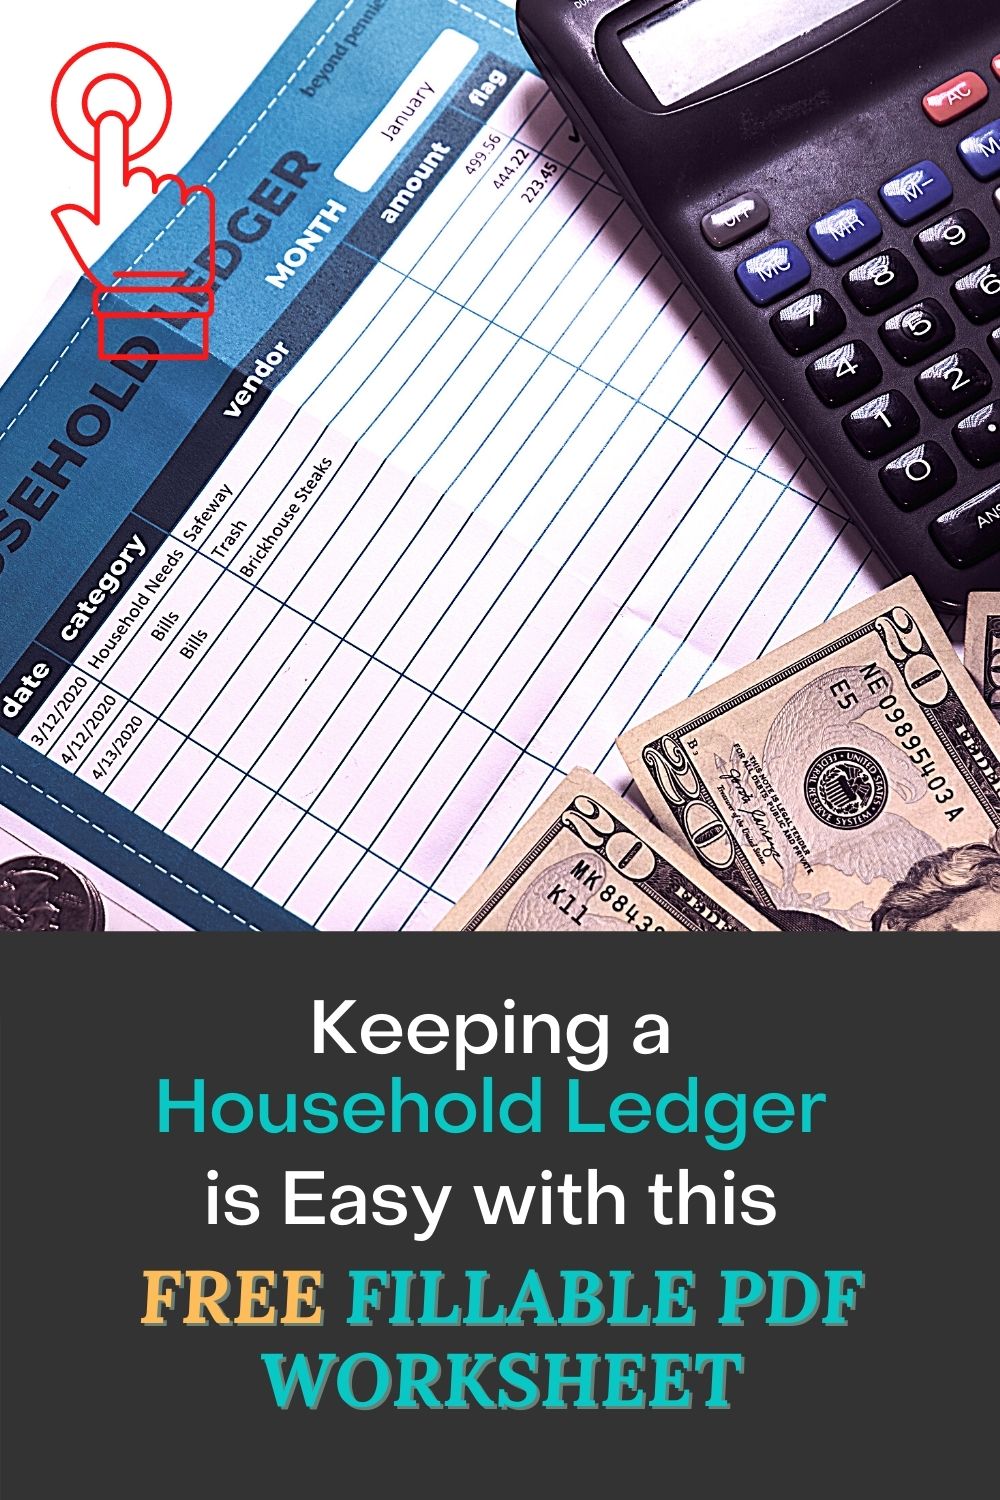 The Magic of Keeping a Household Ledger